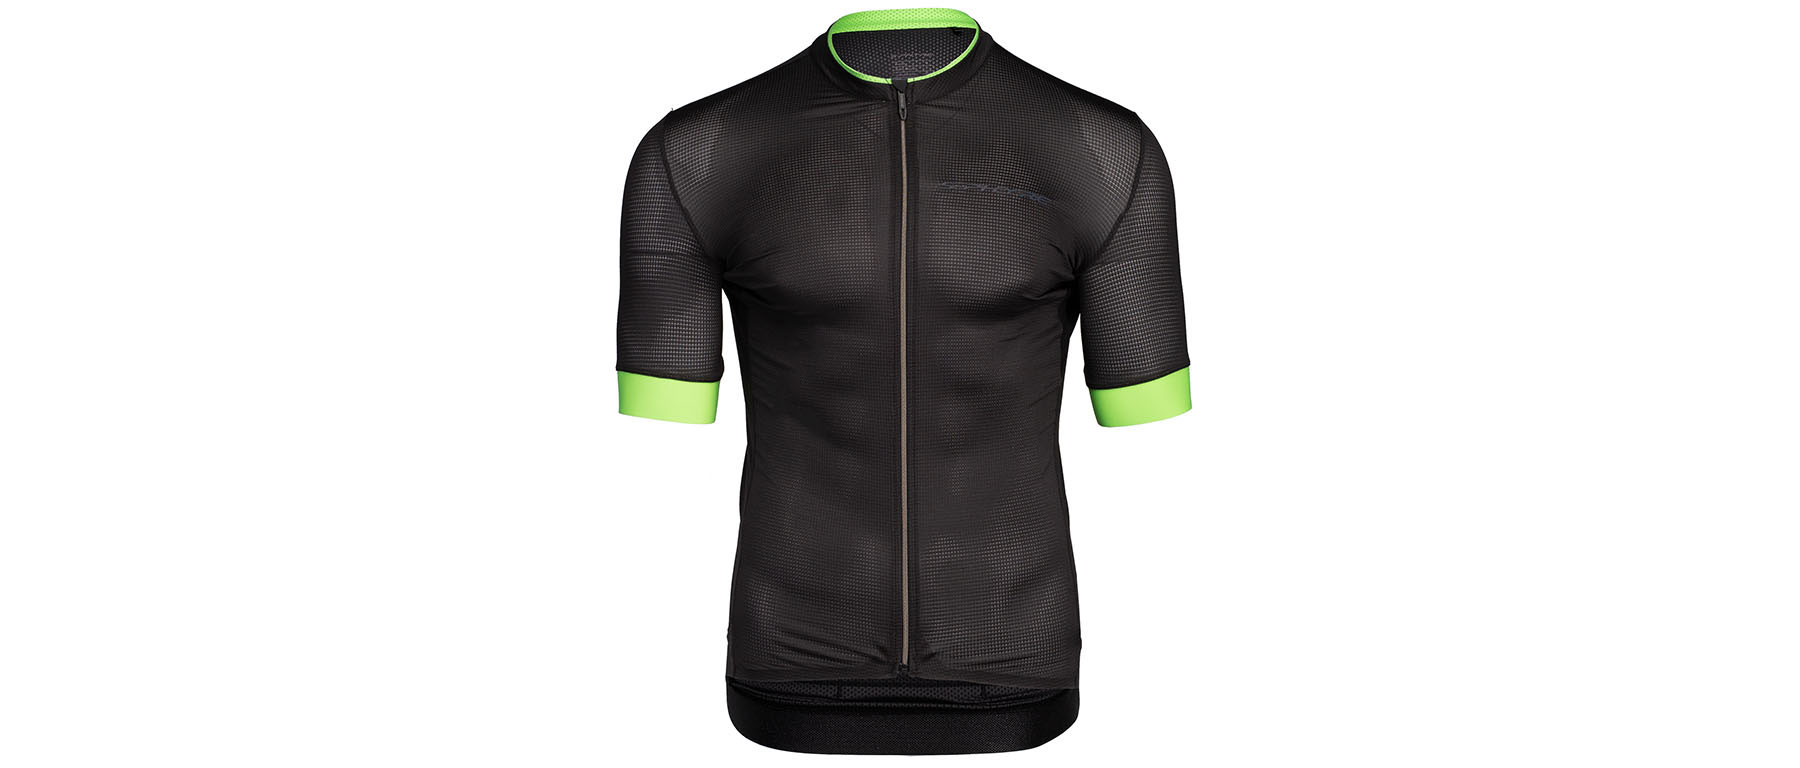 Shimano S-Phyre Short Sleeve Jersey Excel Sports | Shop Online From ...